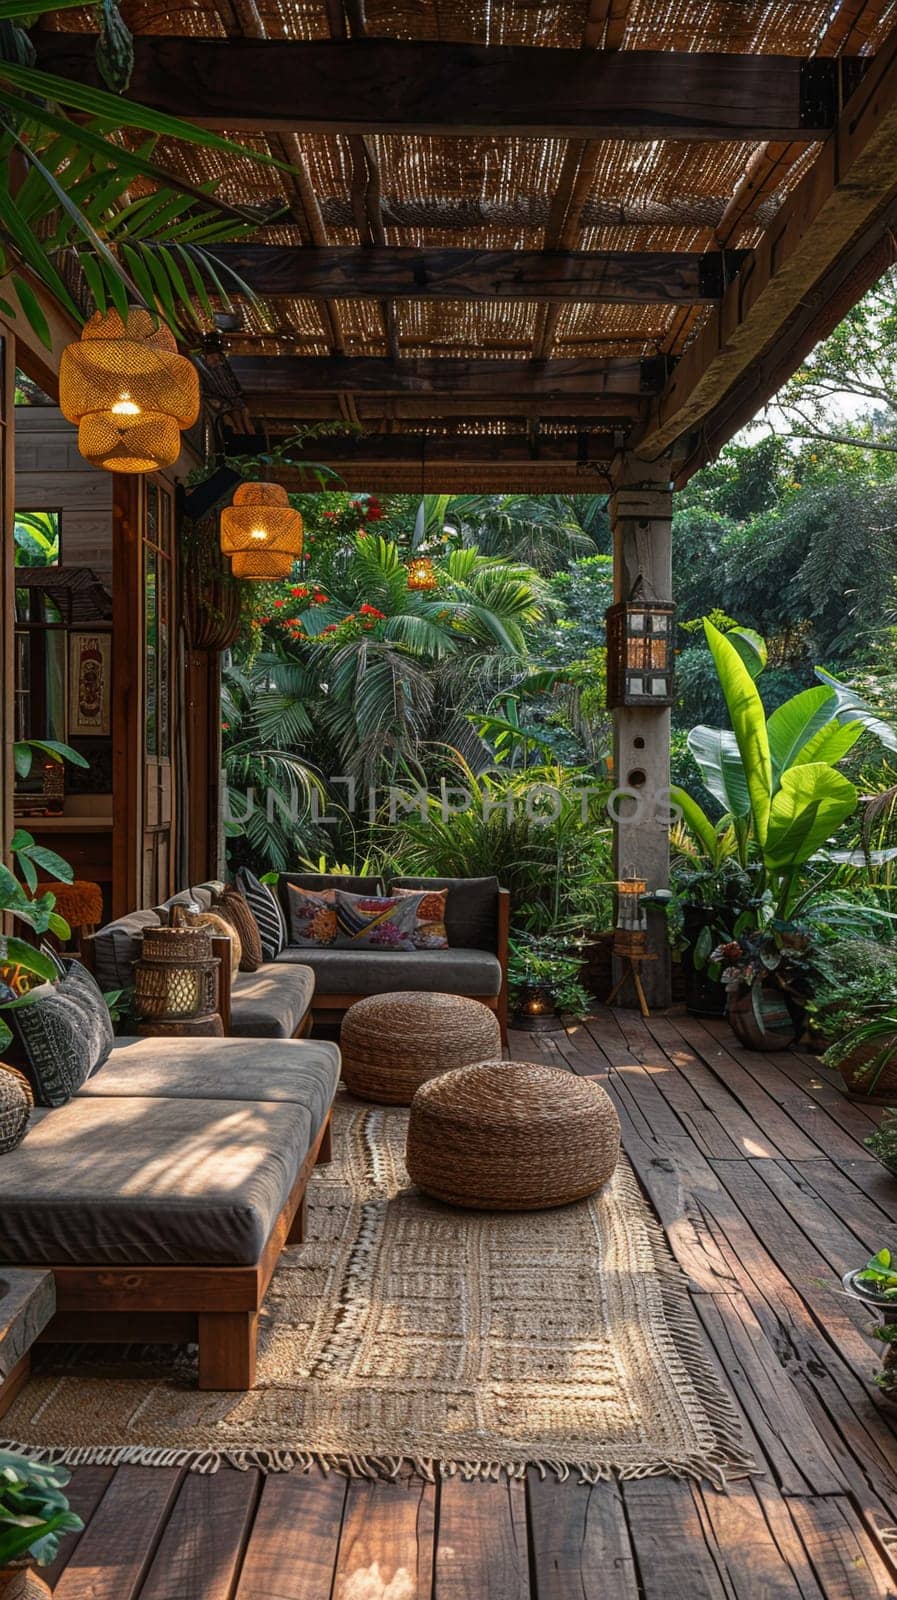 Exotic jungle bungalow with open-air design, natural materials, and tropical plant decor.